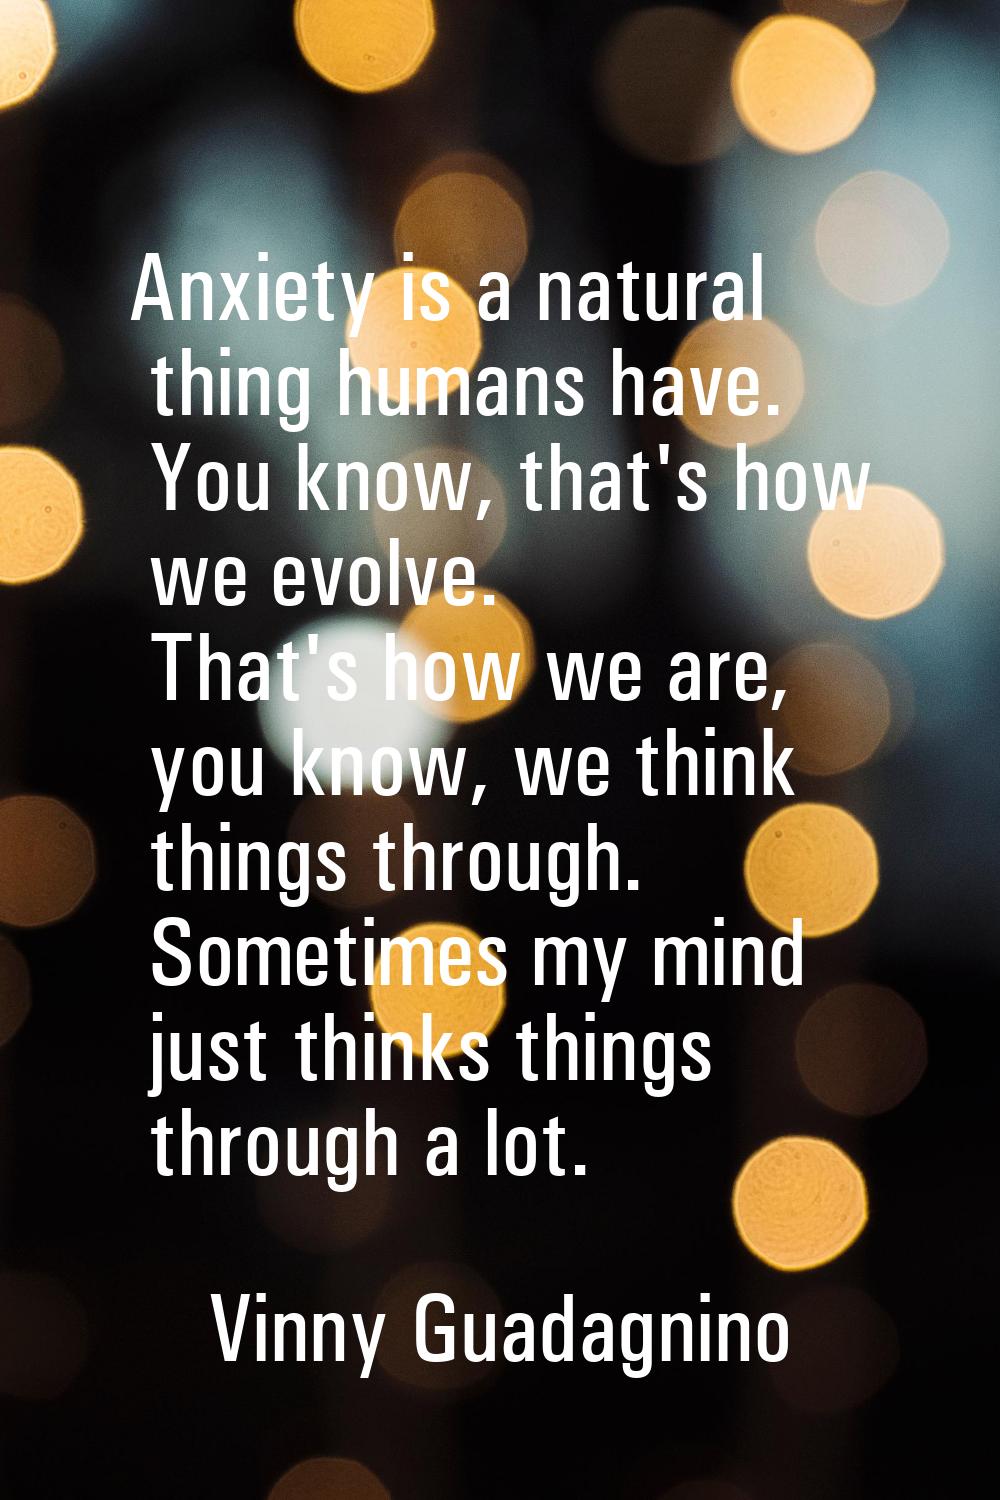 Anxiety is a natural thing humans have. You know, that's how we evolve. That's how we are, you know